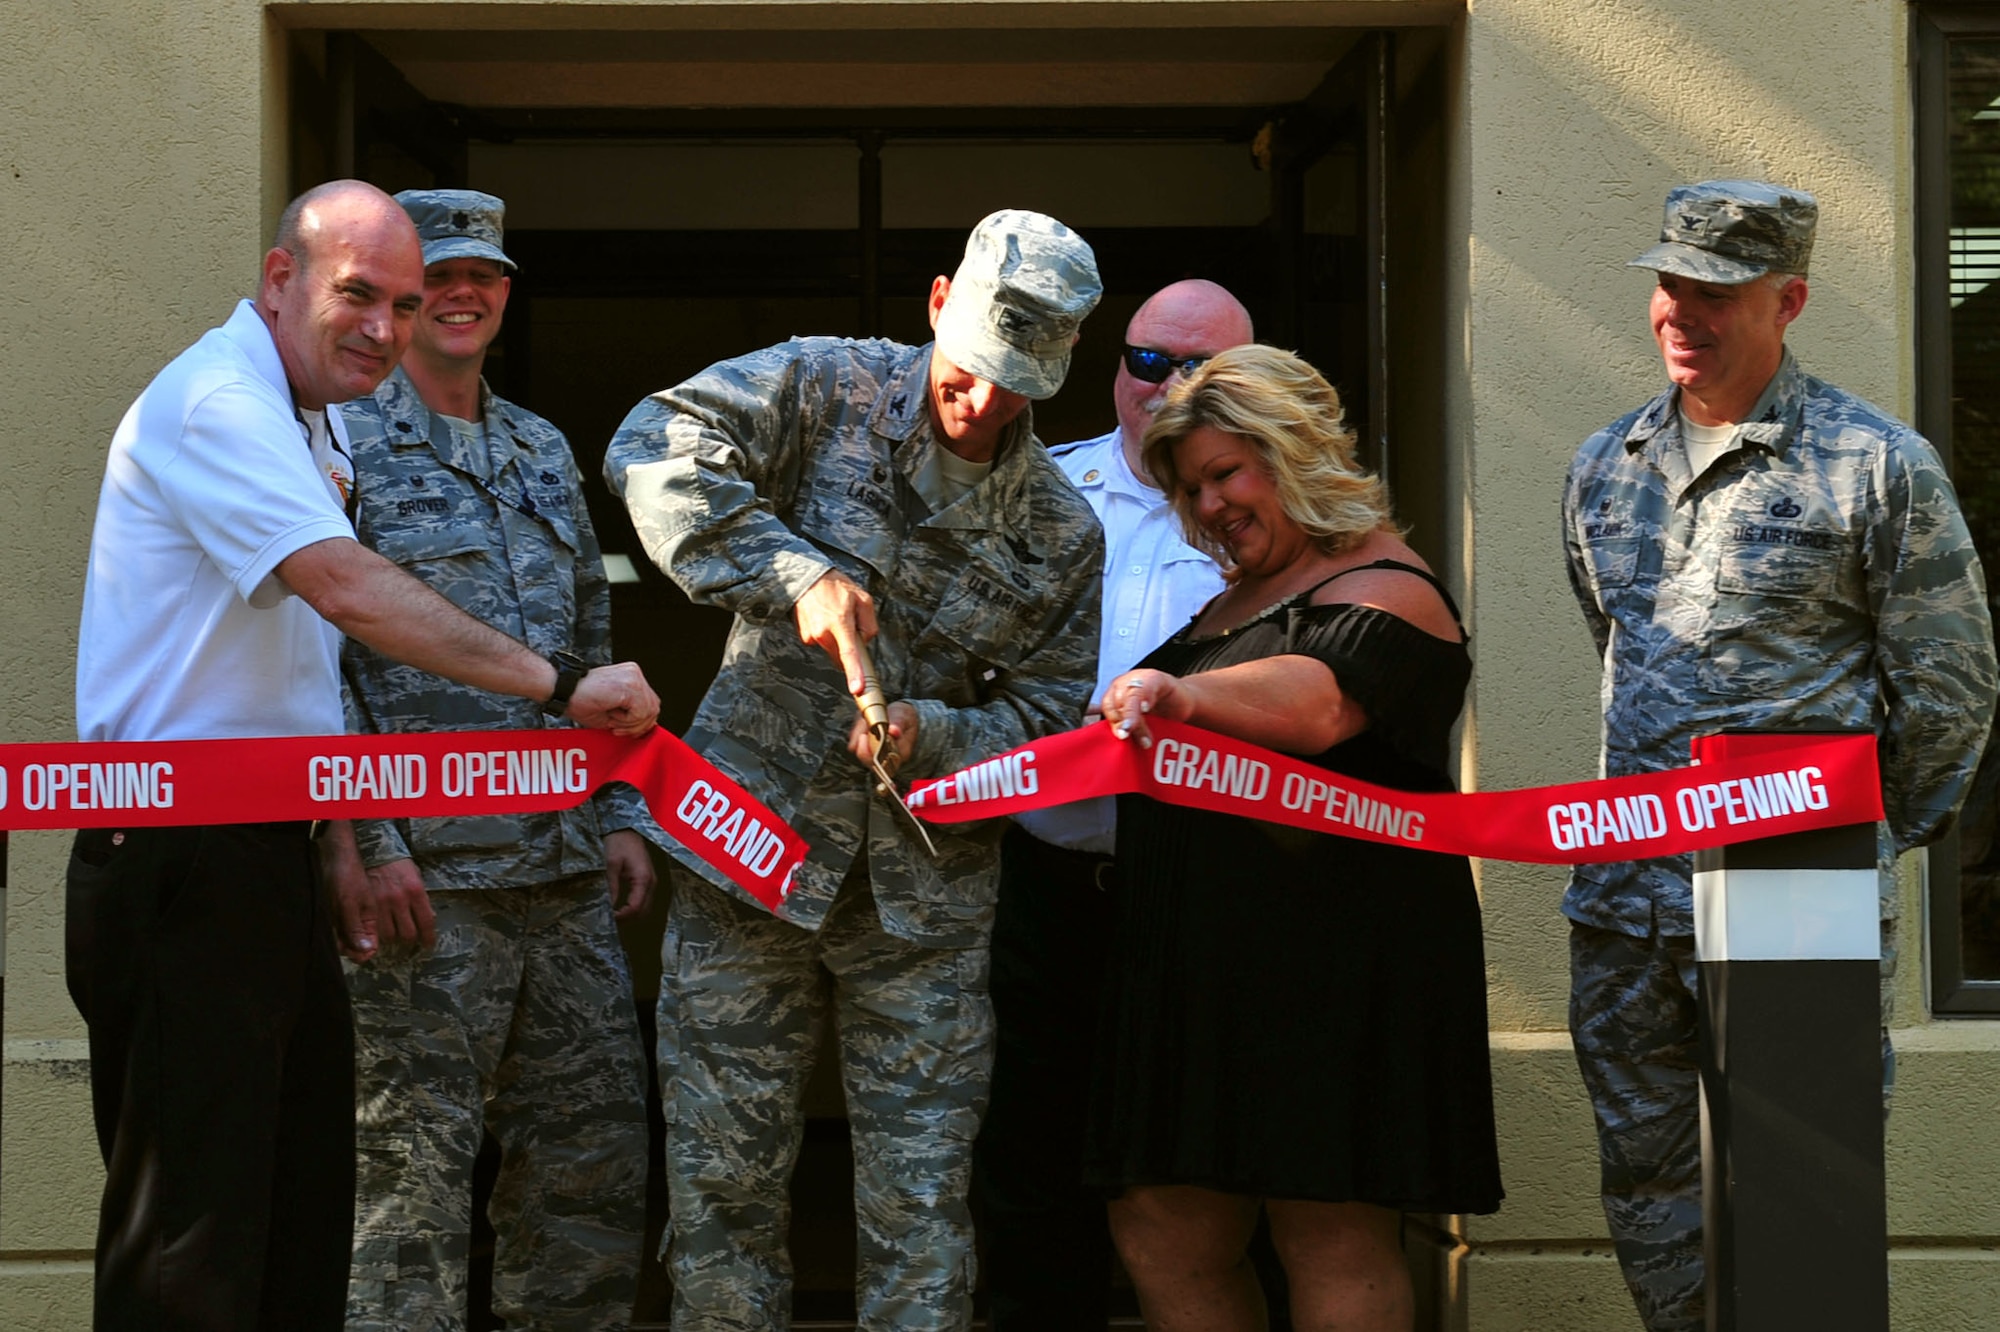 U.S. Air Force Col. Daniel Lasica, 20th Fighter Wing commander cuts a ribbon during the opening ceremony of a new 20th Civil Engineer Squadron fire station at Shaw Air Force Base, S.C., June 29, 2017. Construction for the station, which was built to accommodate up to five Airmen and one fire truck, began in January 2017. (U.S. Air Force photo by Airman 1st Class Kathryn R.C. Reaves)